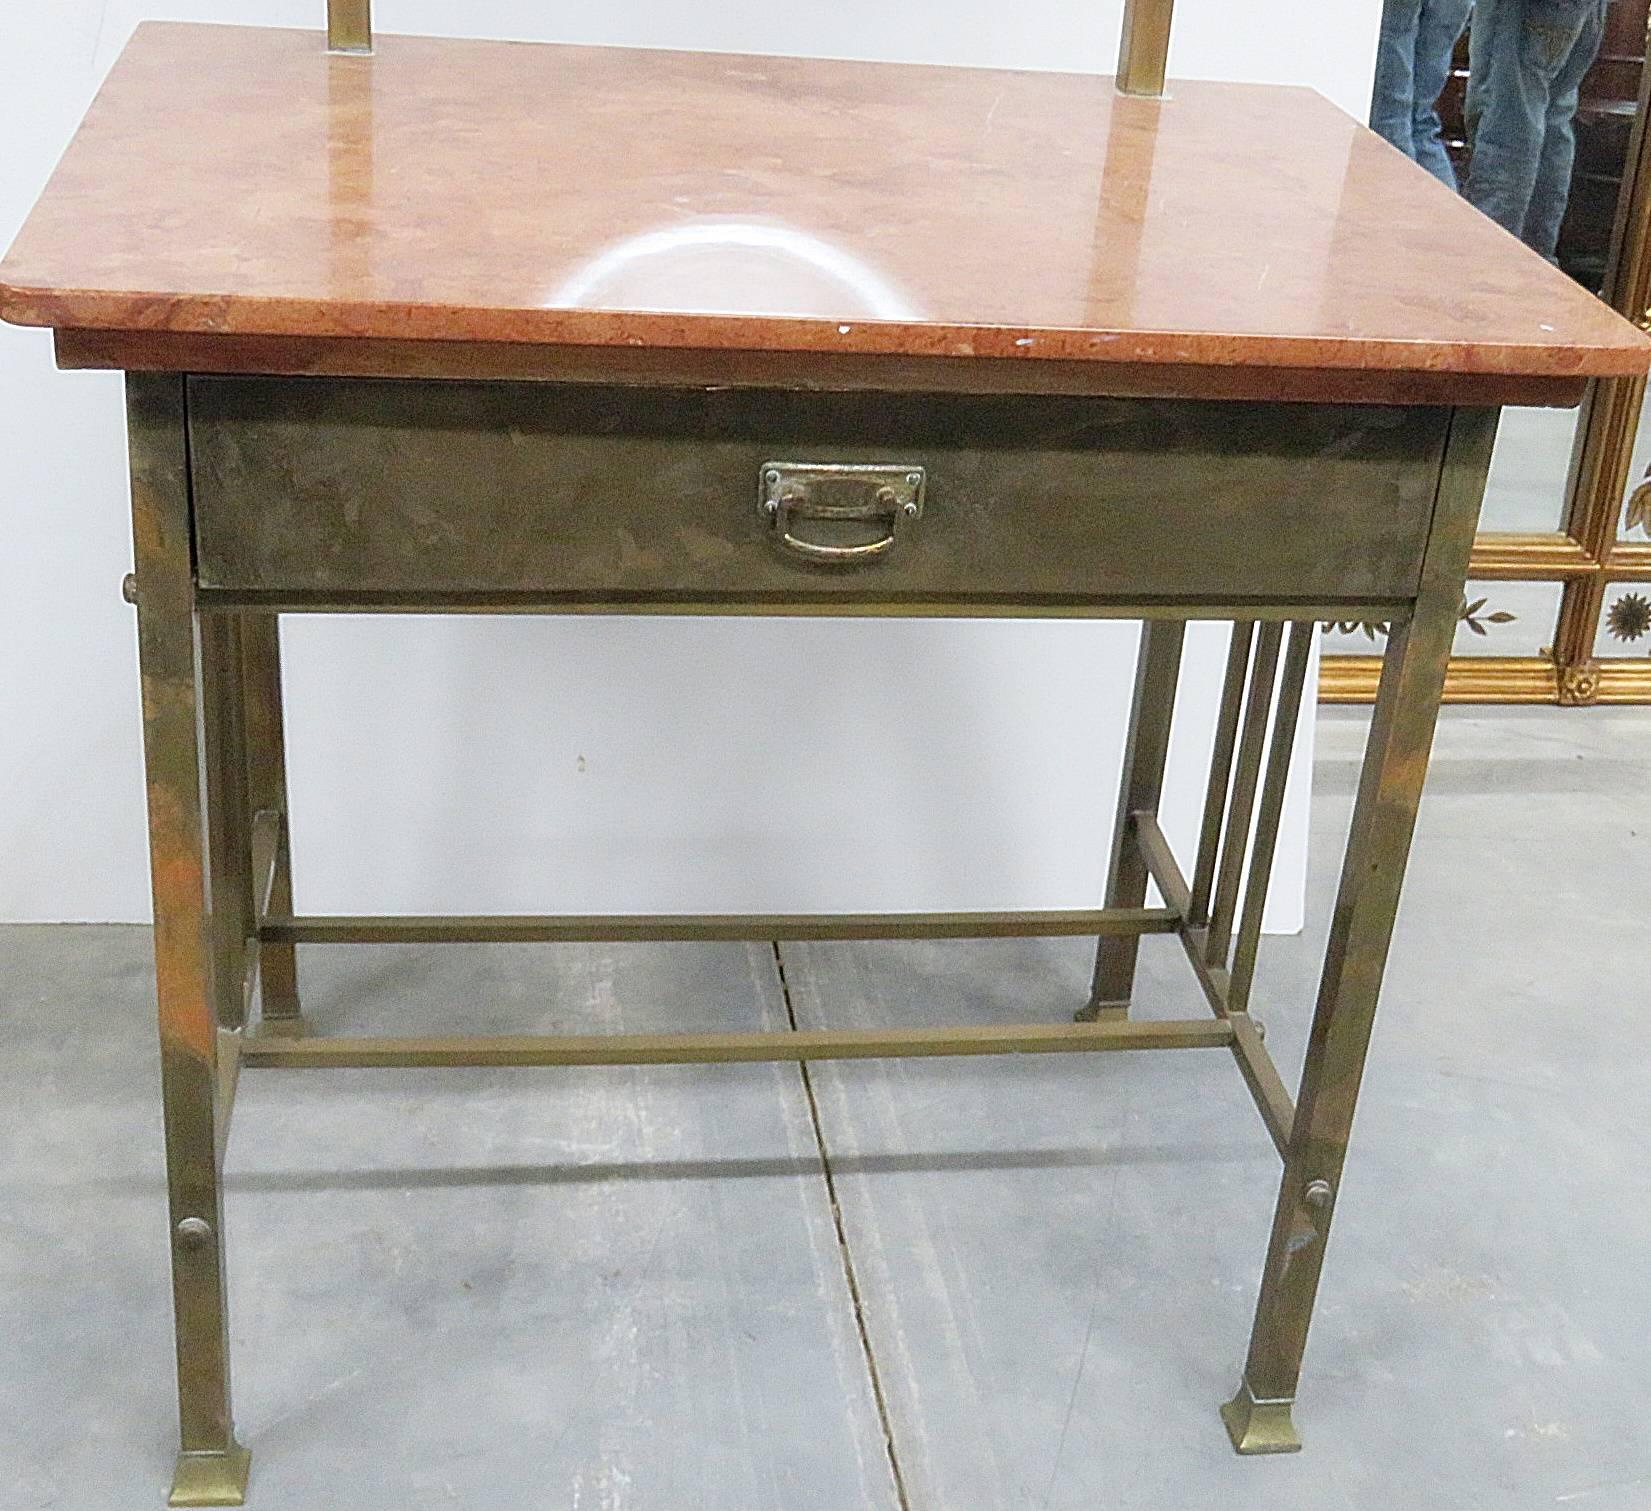 Primitive marble-top vanity with mirror and one drawer. Measures: 28.5